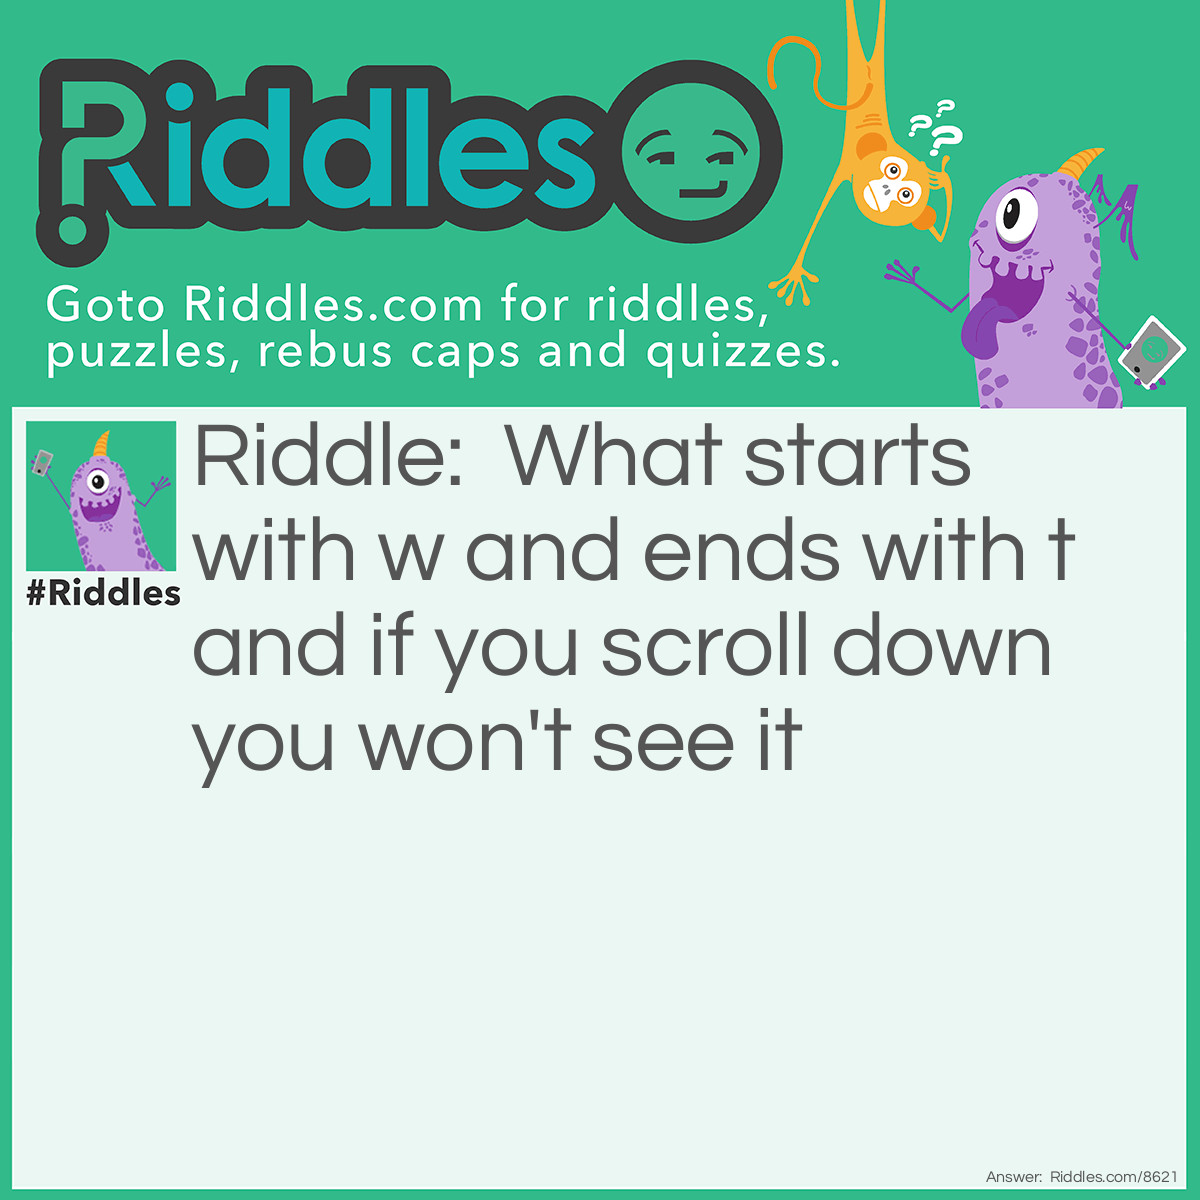 Riddle: What starts with w and ends with t and if you scroll down you won't see it Answer: This Riddle.